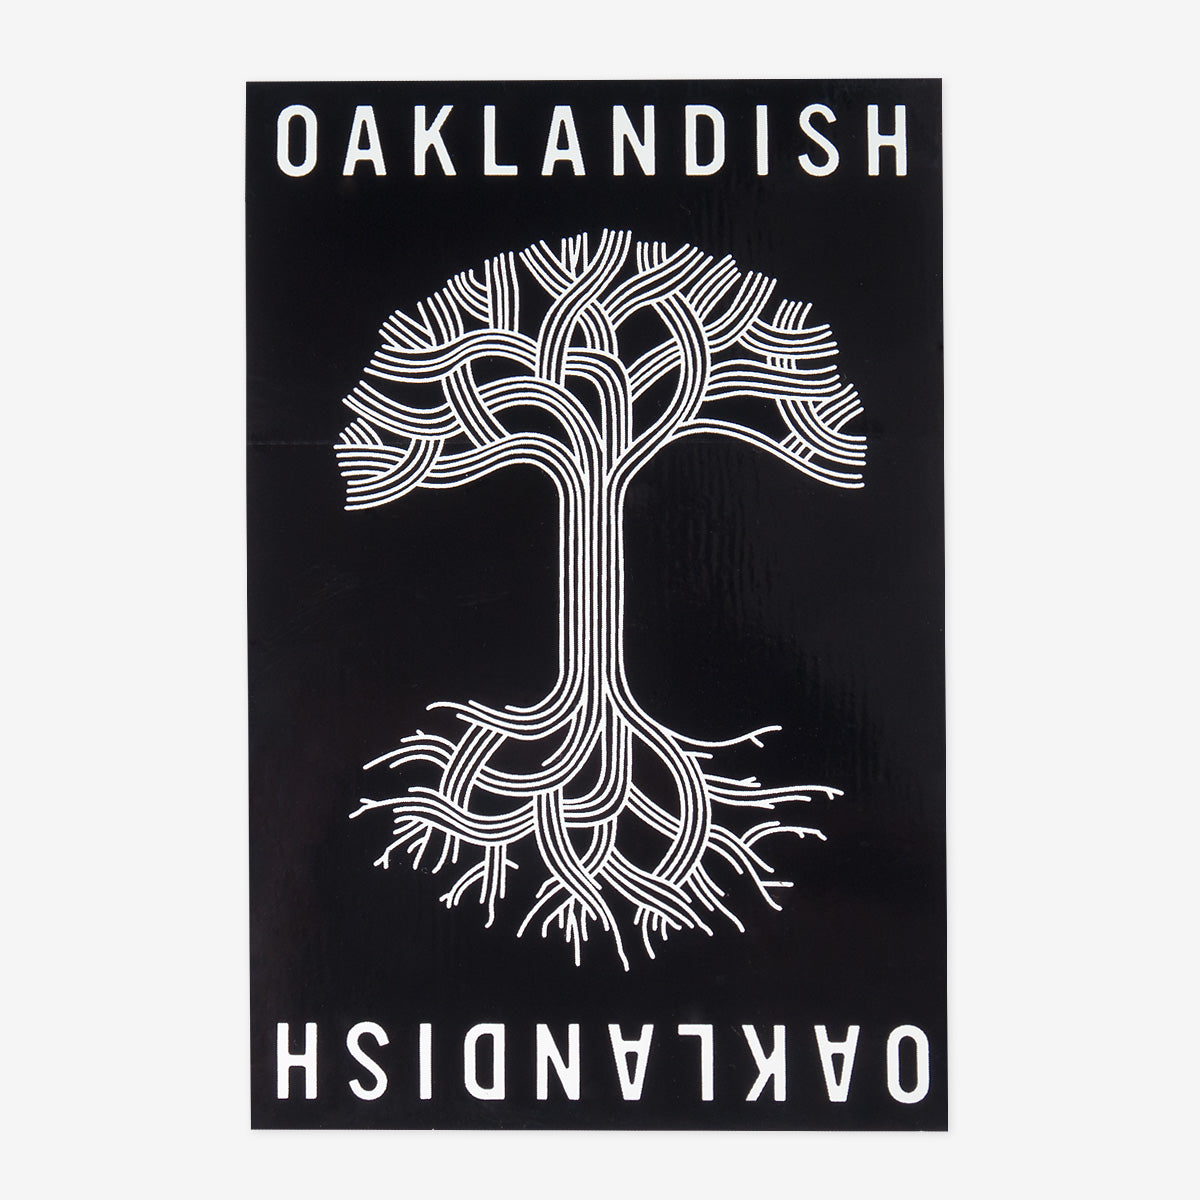 Black and white rectangular sticker with Oaklandish wordmark and tree logo in white.